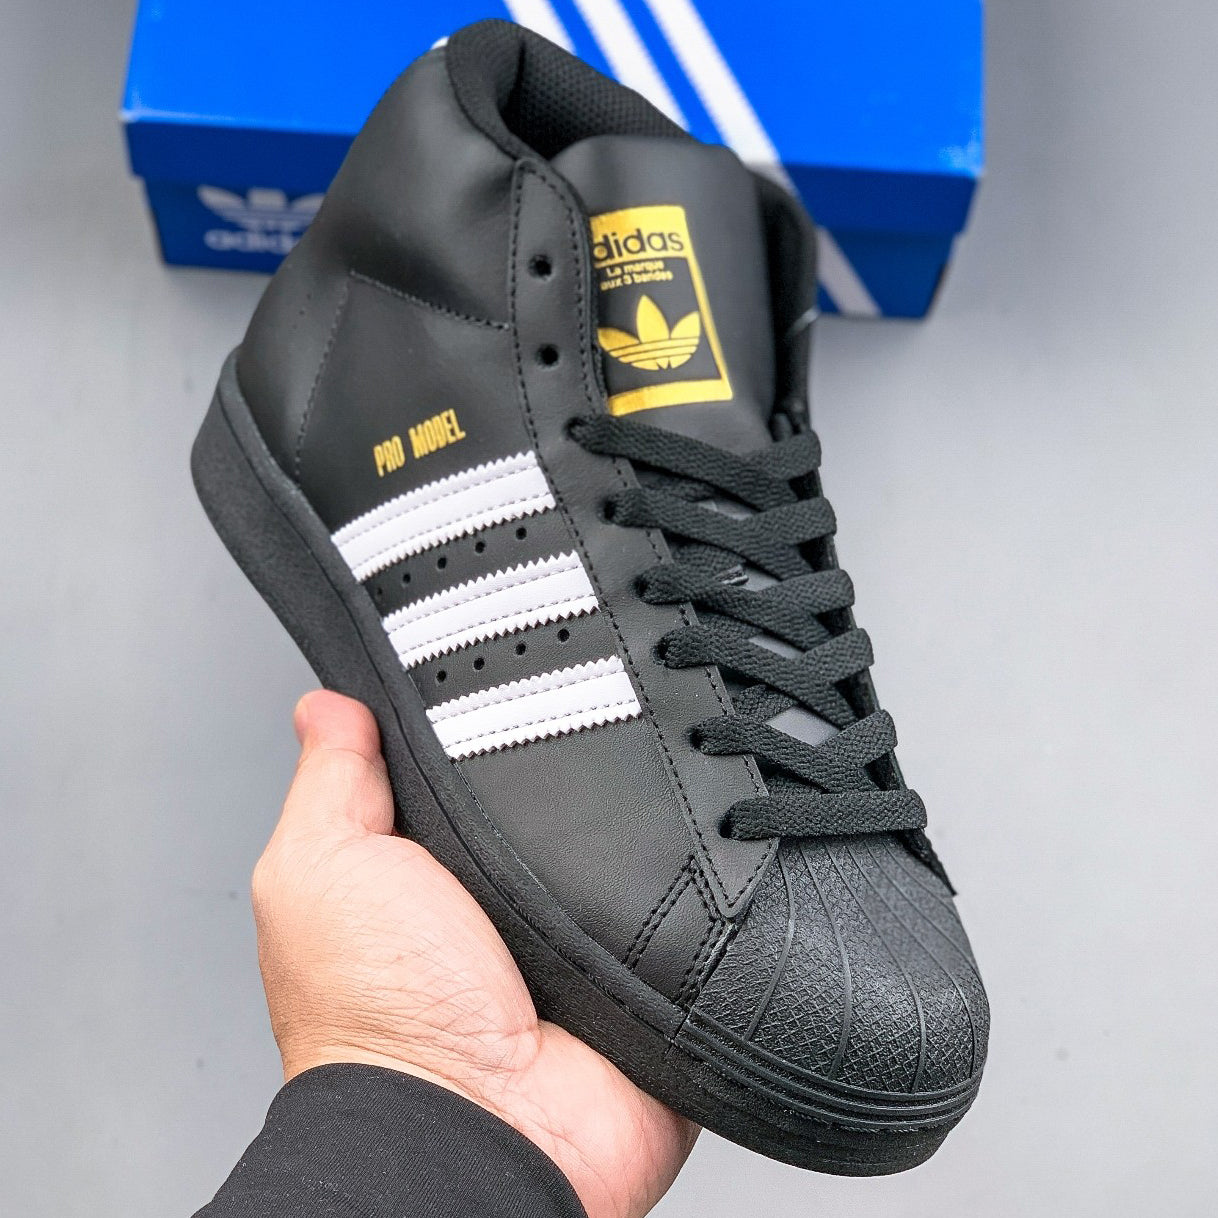 Adidas Superstar Pro Model Sneakers Shoes